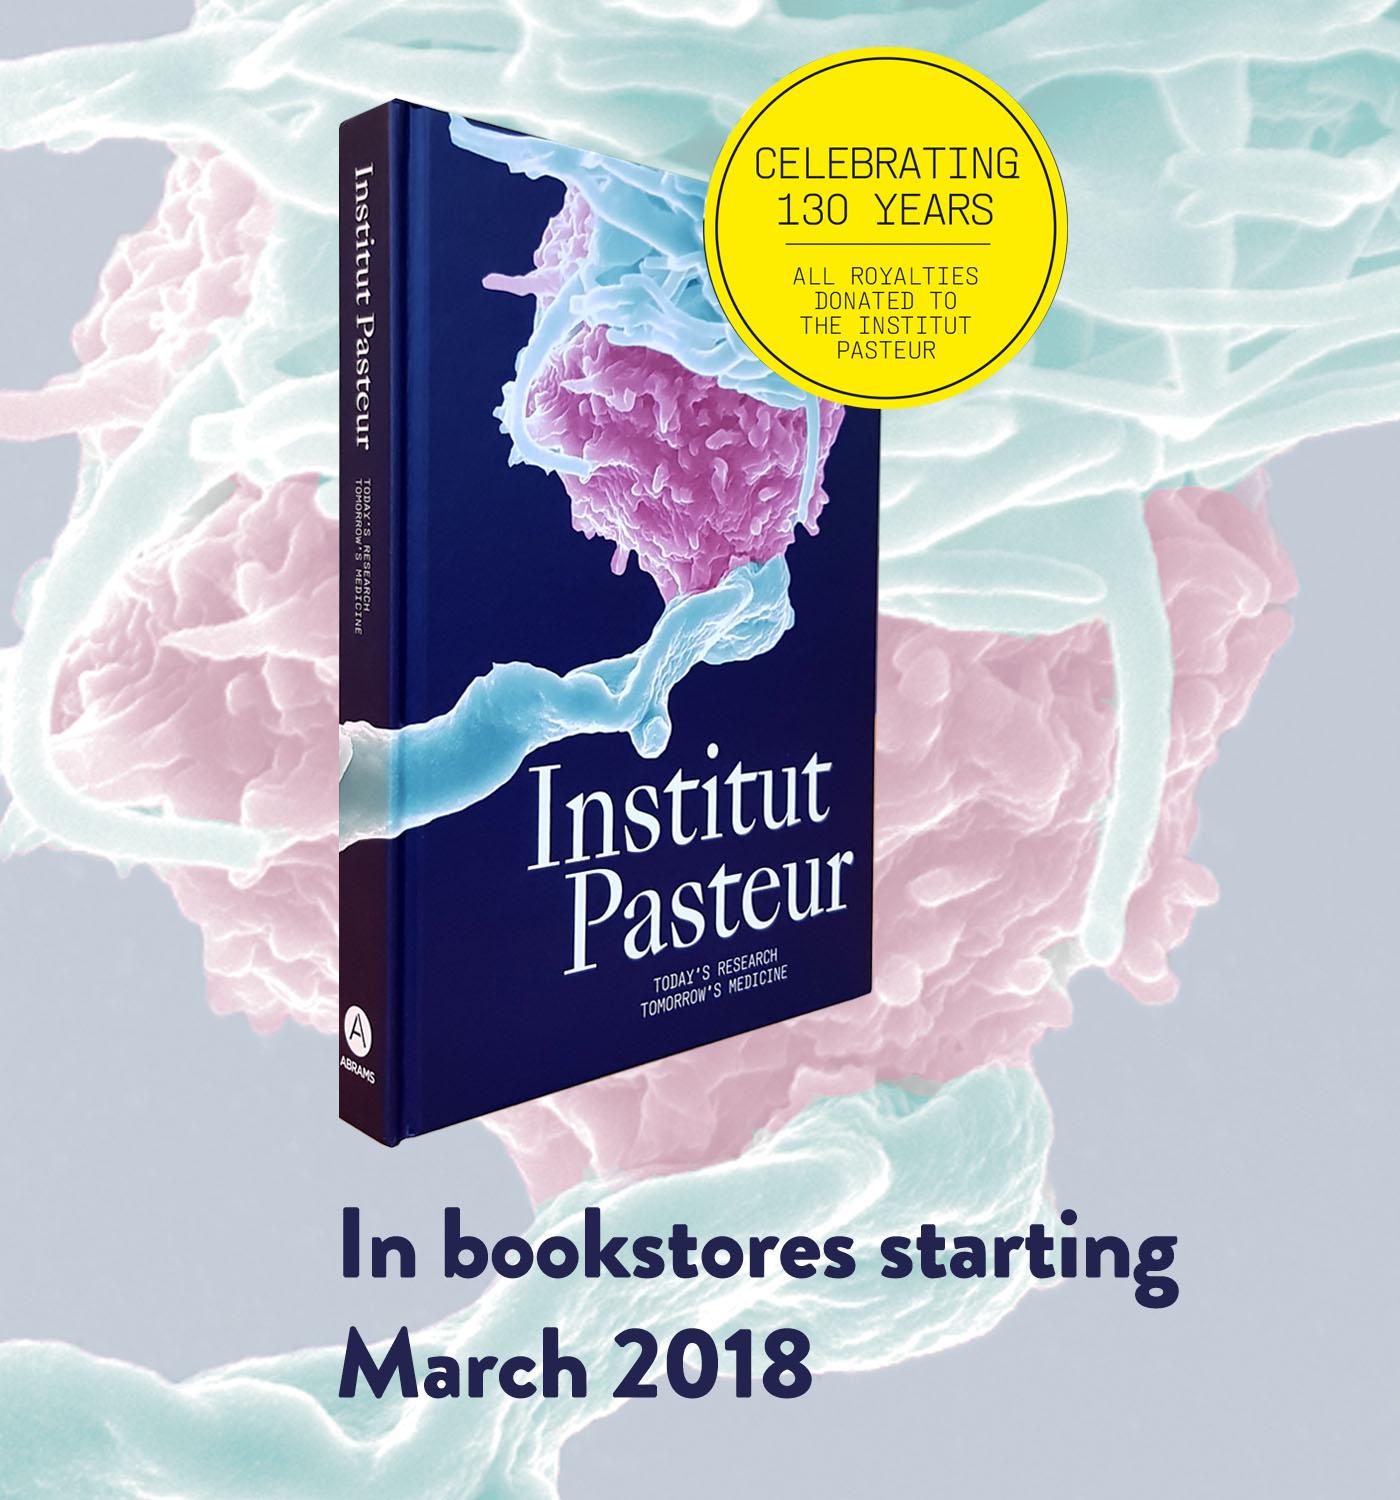 In celebration of the Institut Pasteur’s 130th anniversary Discover our new book